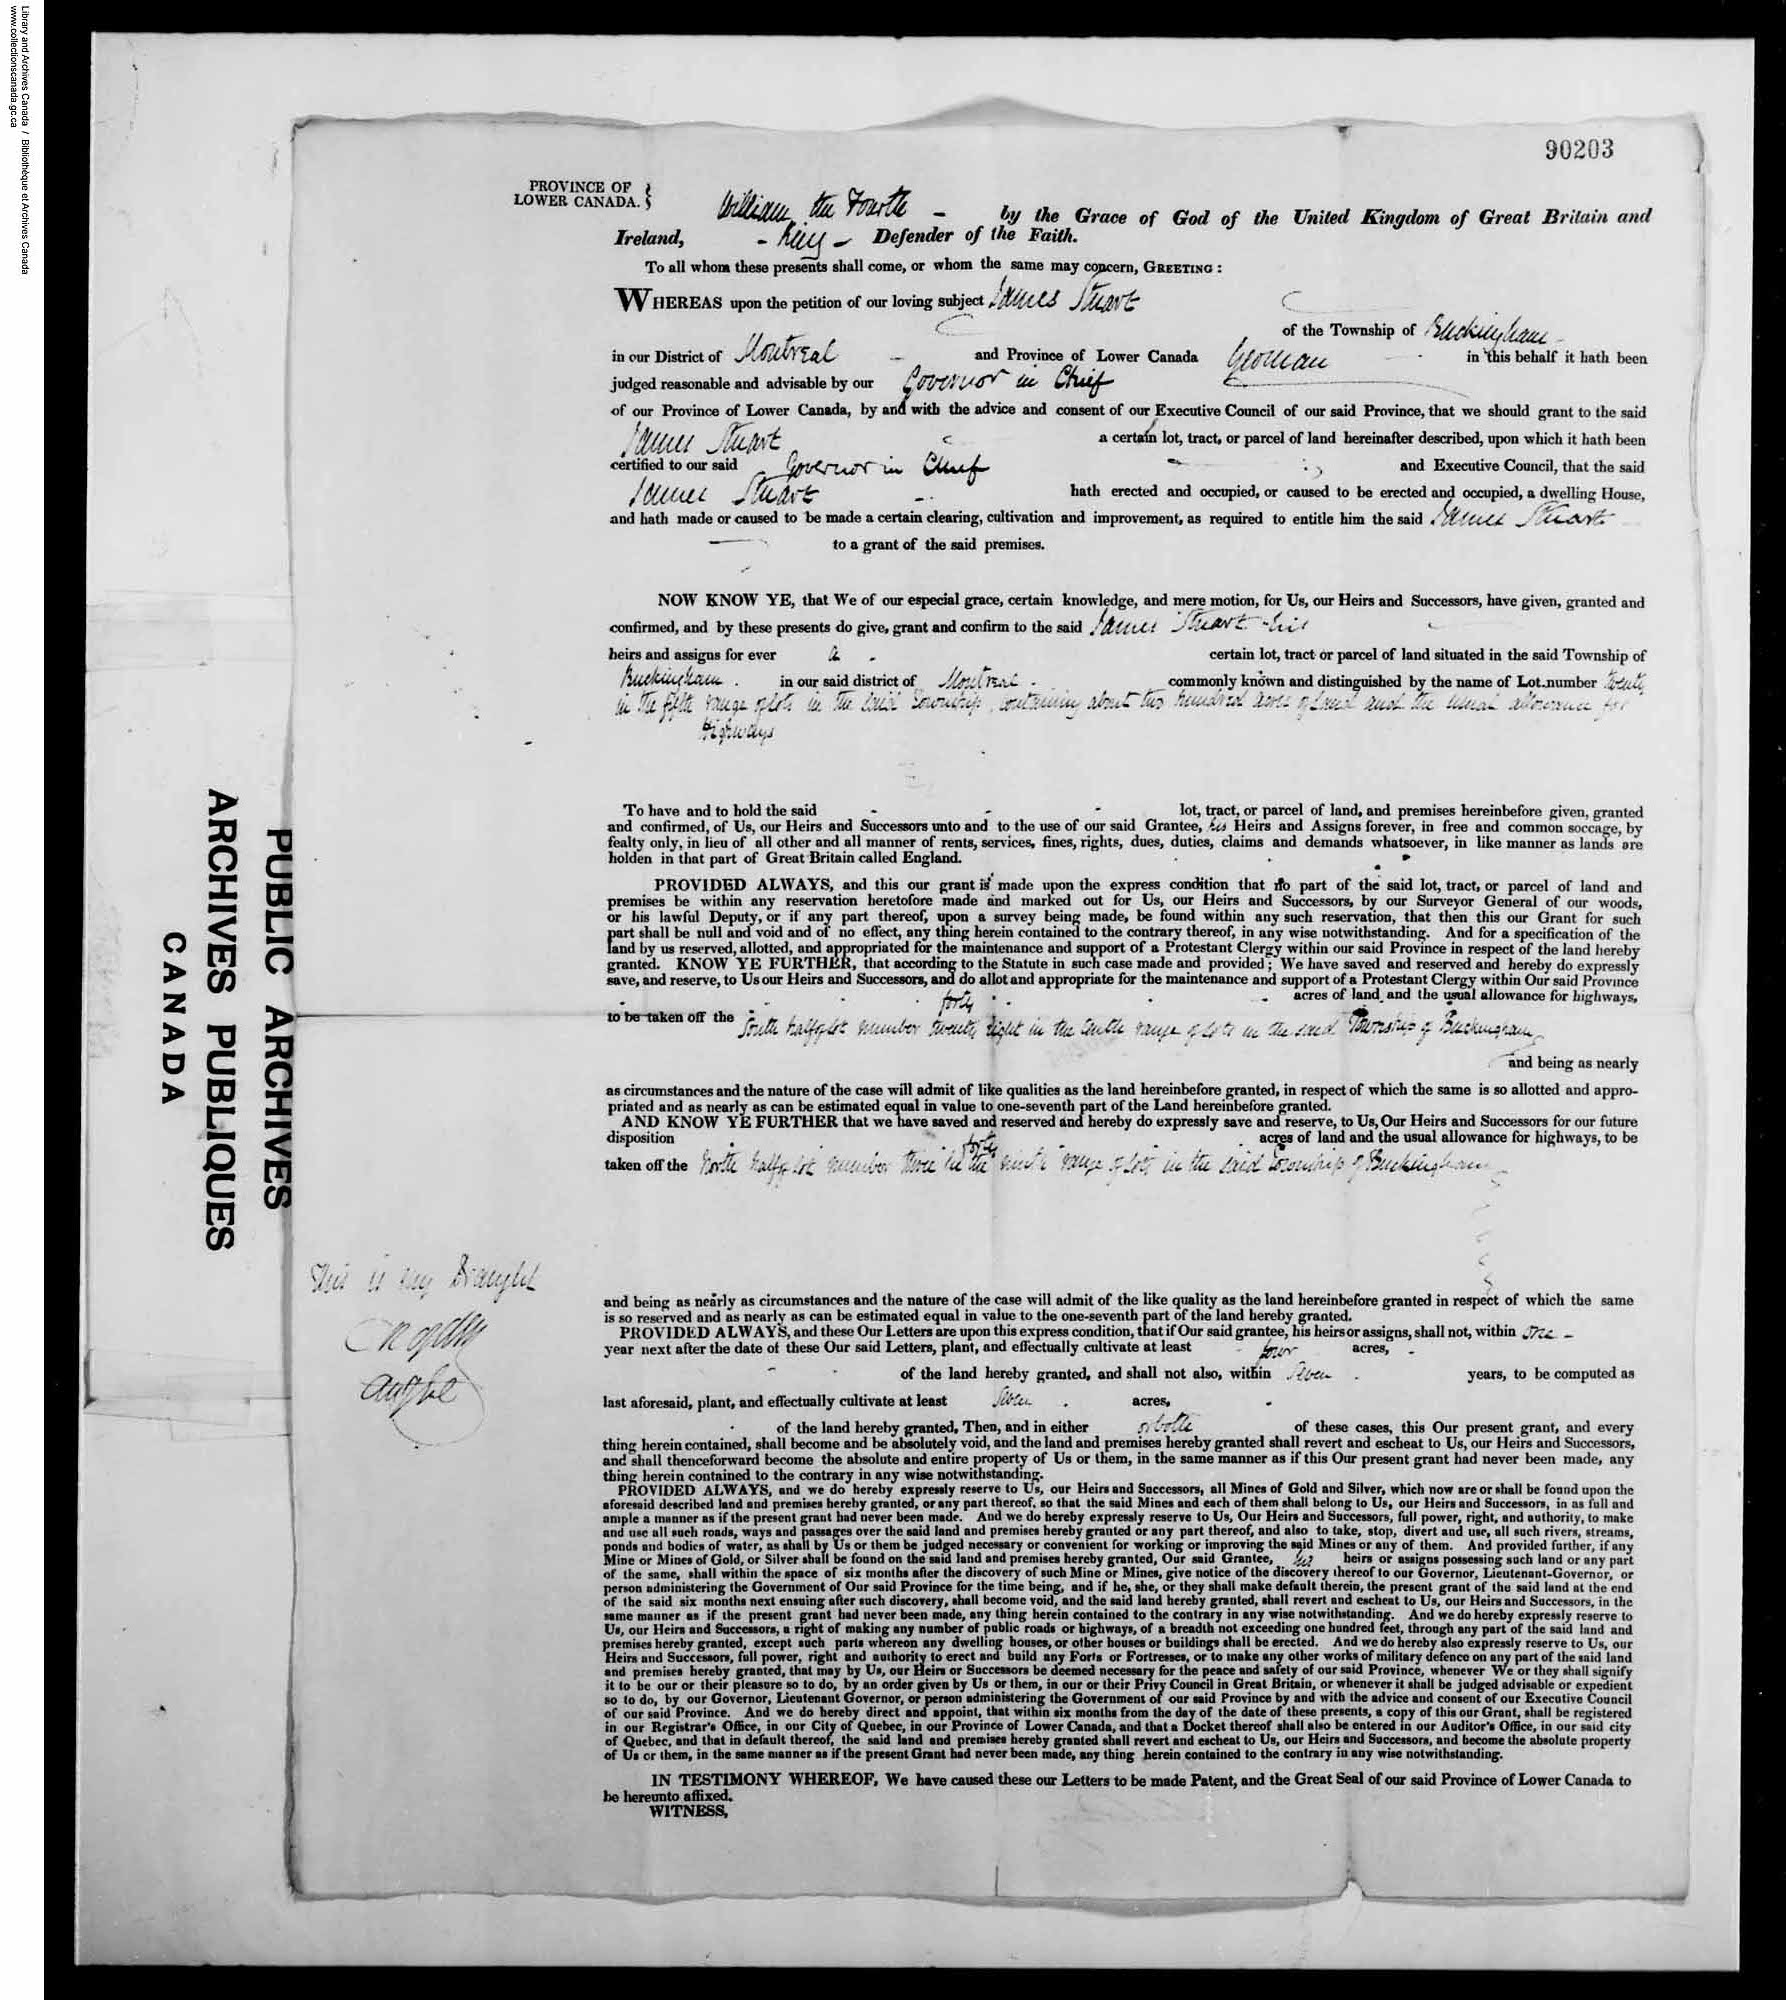 Digitized page of  for Image No.: e008737331